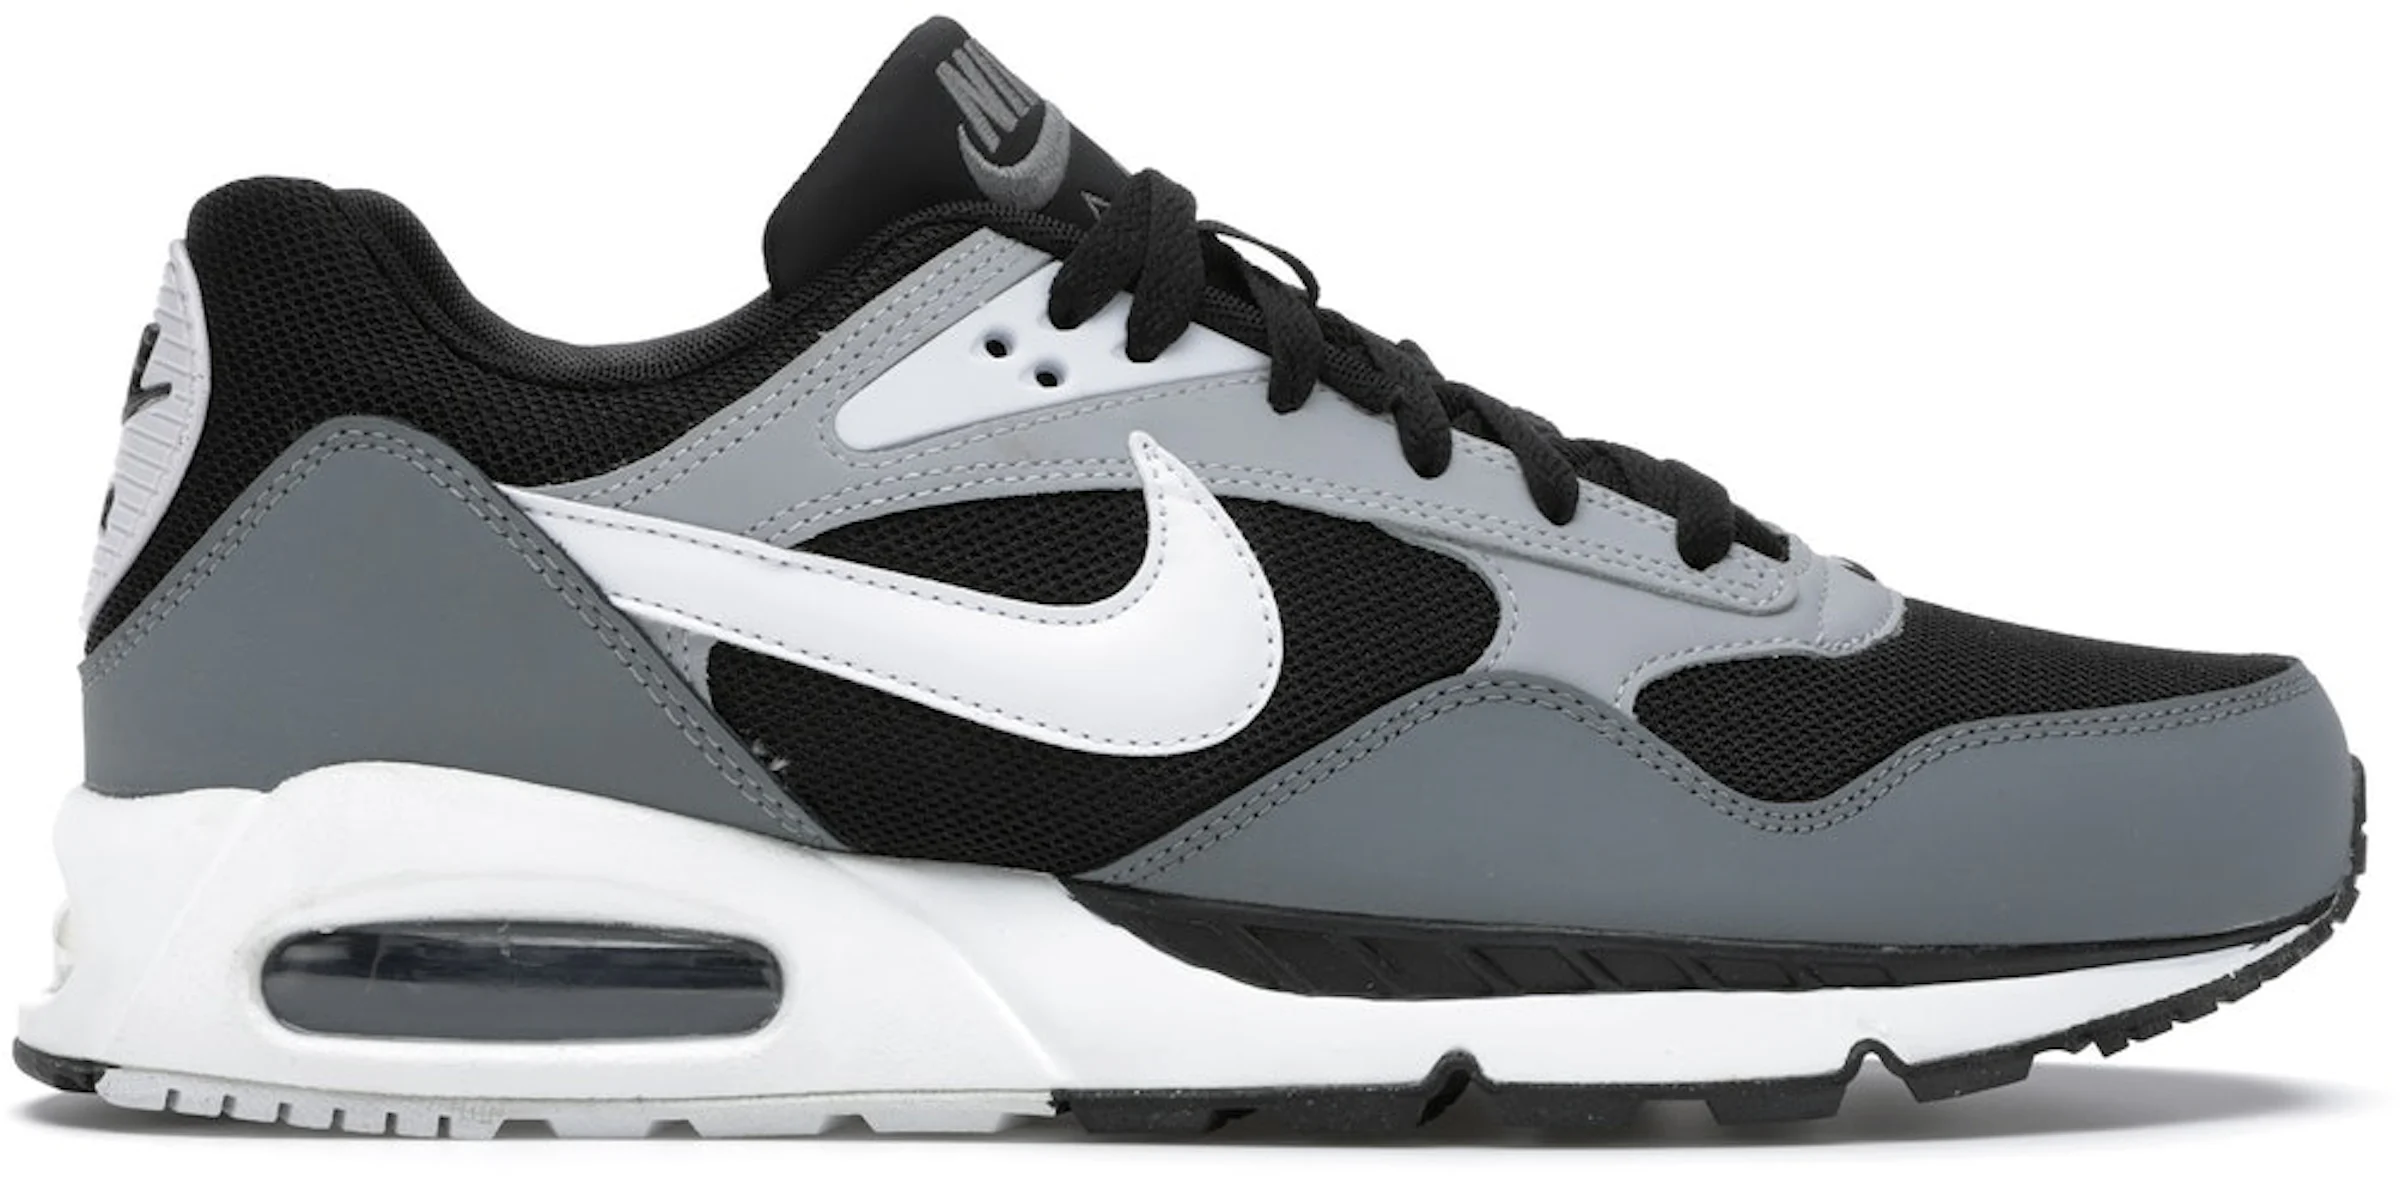 https://images.stockx.com/images/Nike-Air-Max-Correlate-Black-White-Grey-Product.png?fit=fill&bg=FFFFFF&w=1200&h=857&fm=webp&auto=compress&dpr=2&trim=color&updated_at=1686755854&q=60